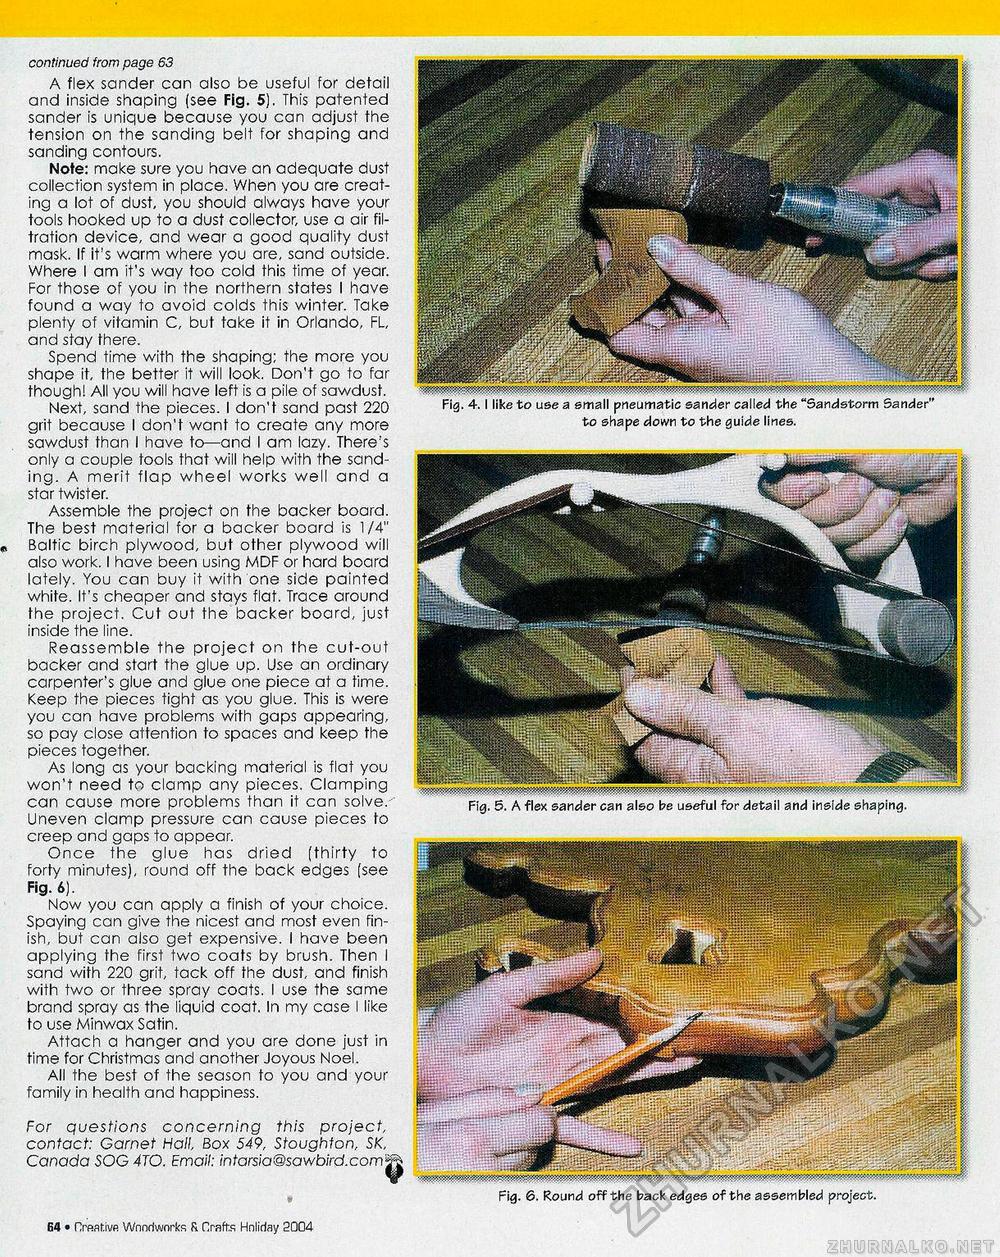 Creative Woodworks  & crafts-103-2004-Holiday,  64